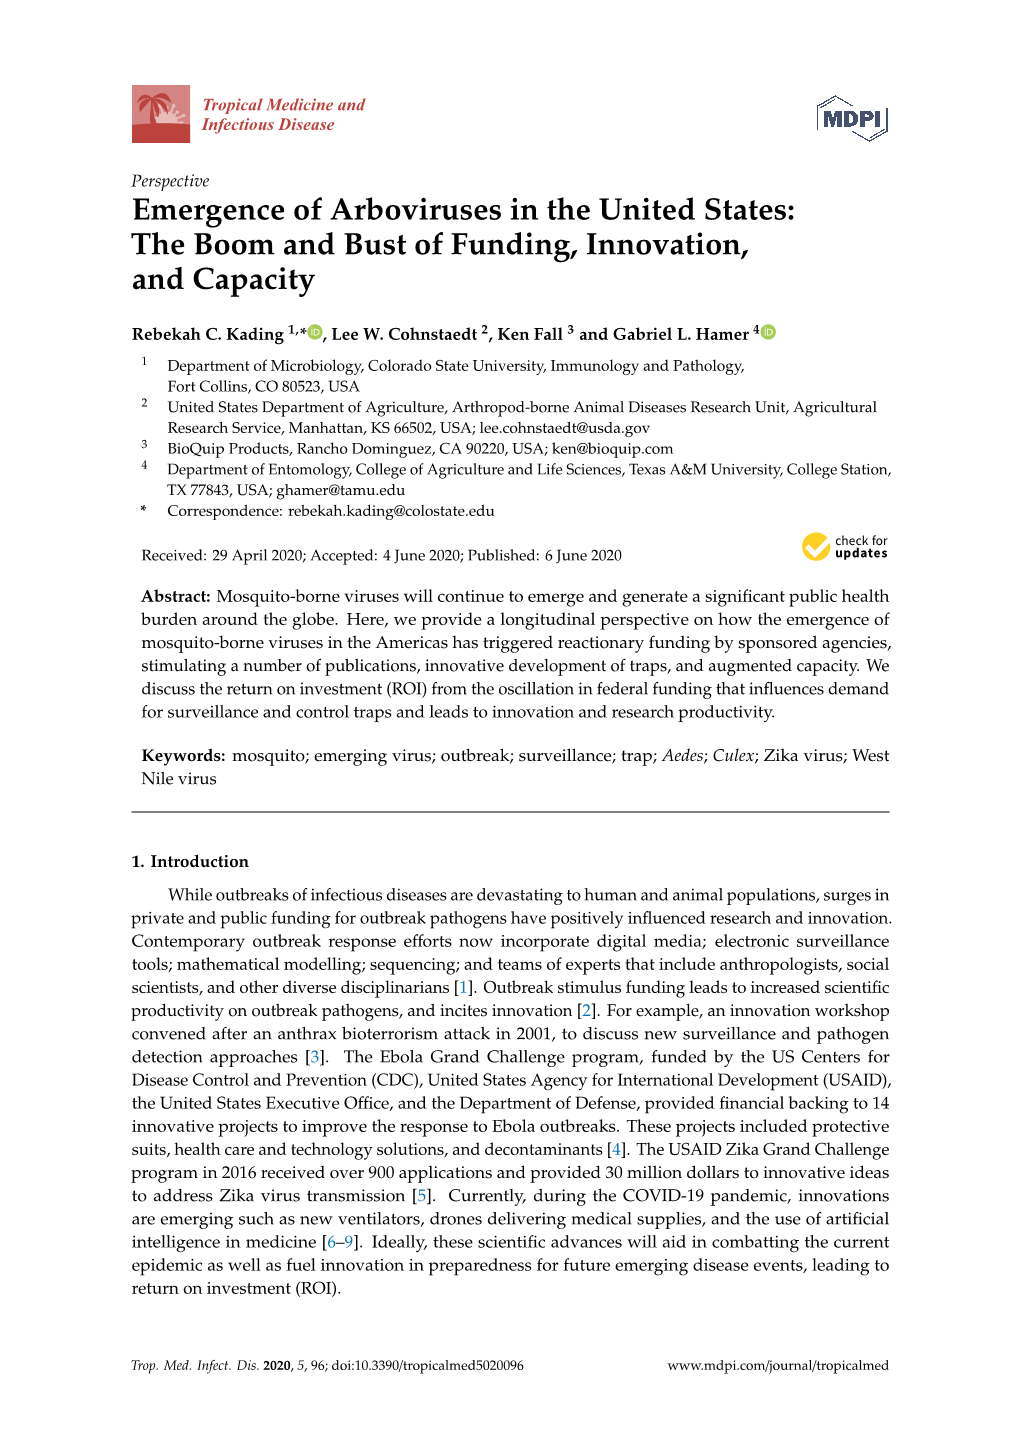 Emergence of Arboviruses in the United States: the Boom and Bust of Funding, Innovation, and Capacity